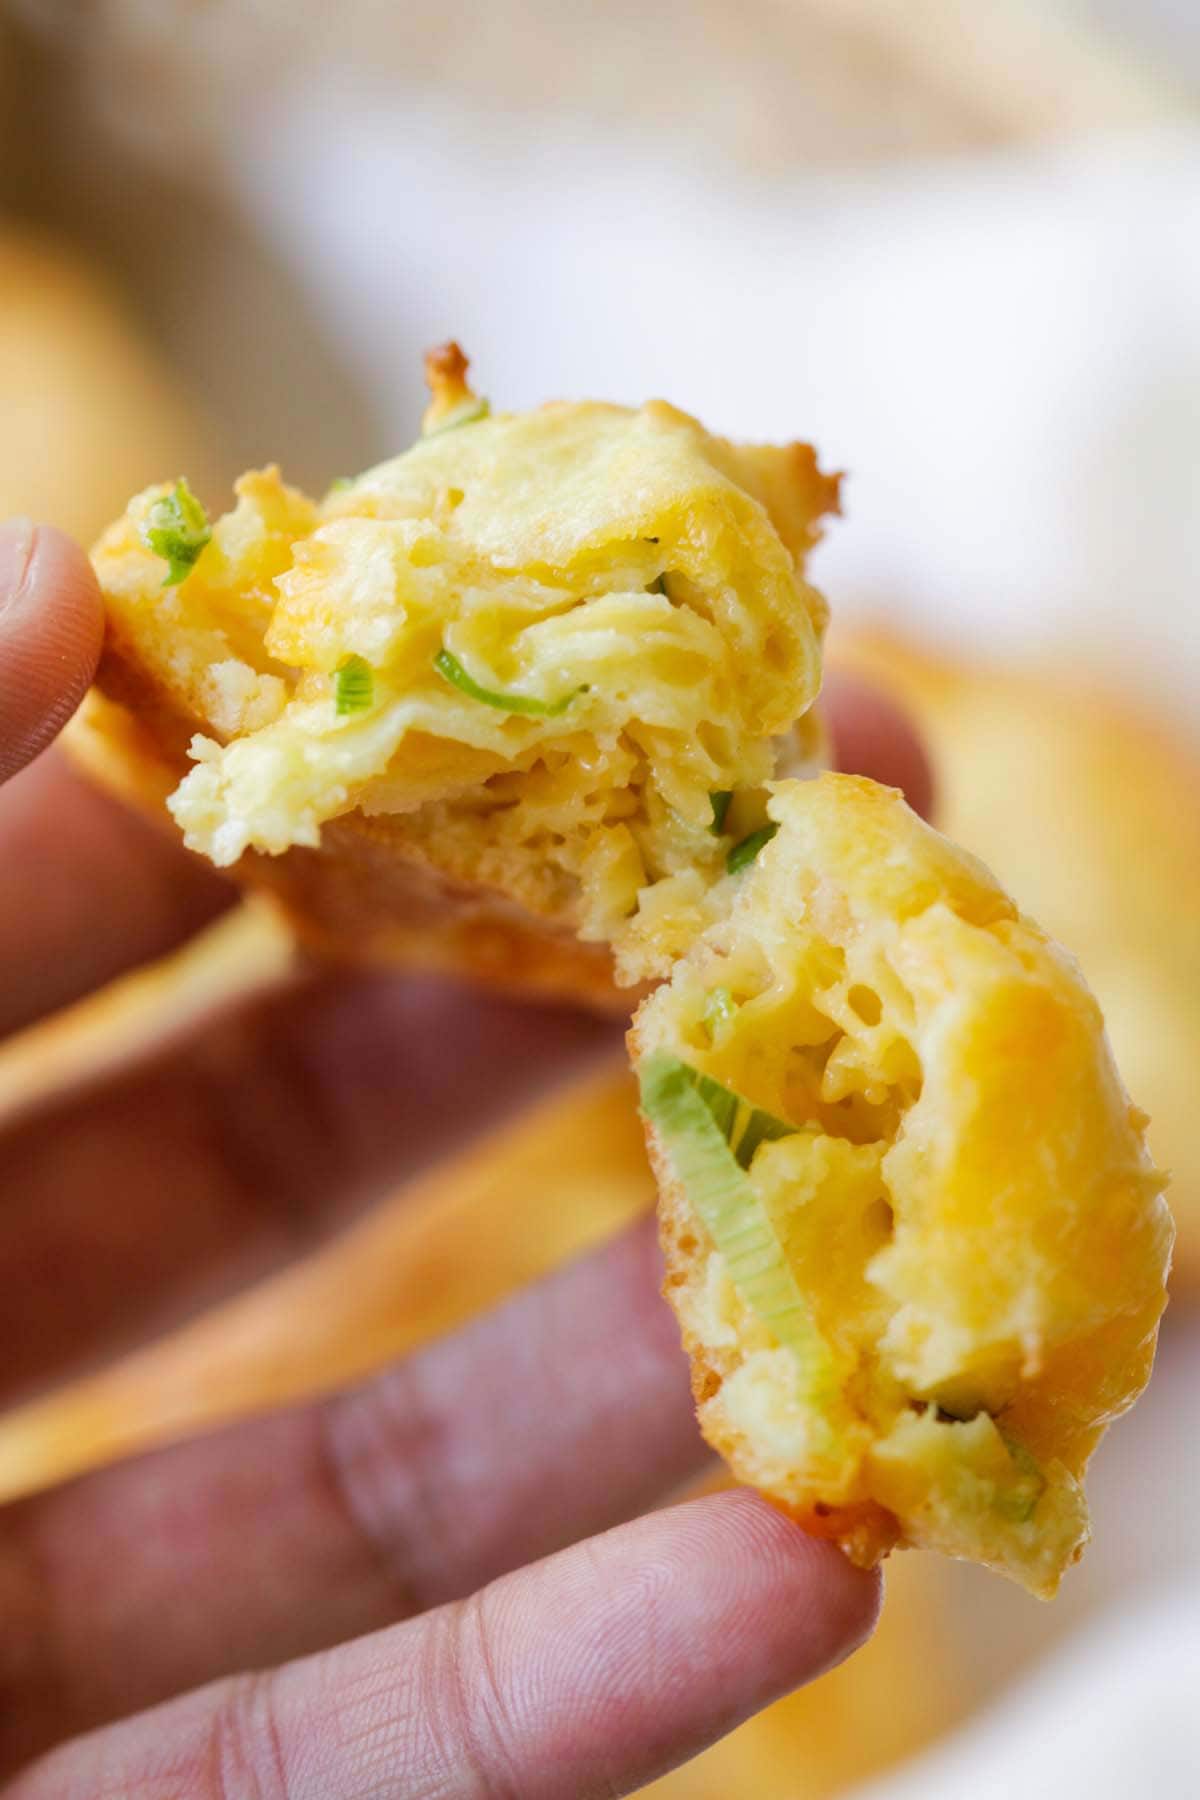 Buttery homemade French Cheddar Cheese Puffs split in half and held by a hand.